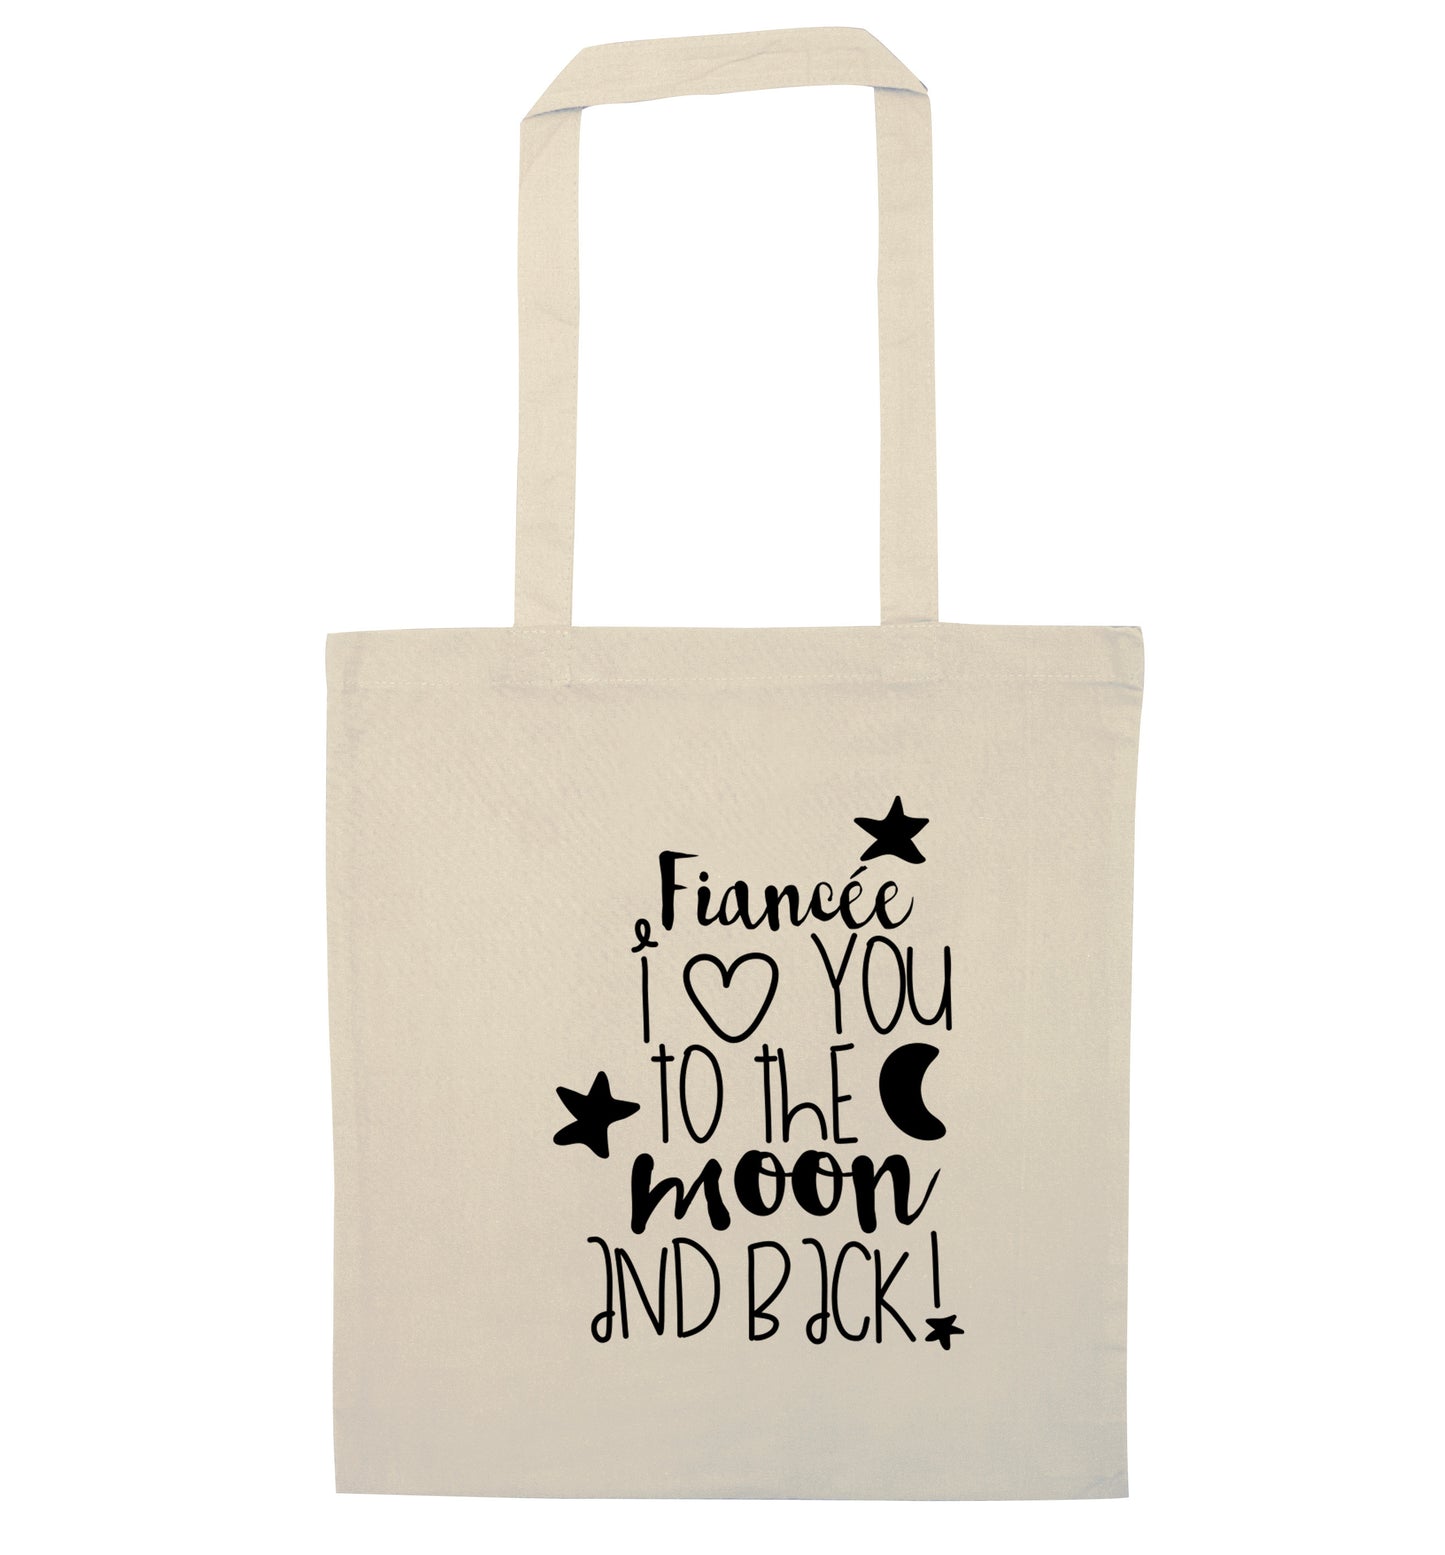 Fianc?_e I love you to the moon and back natural tote bag